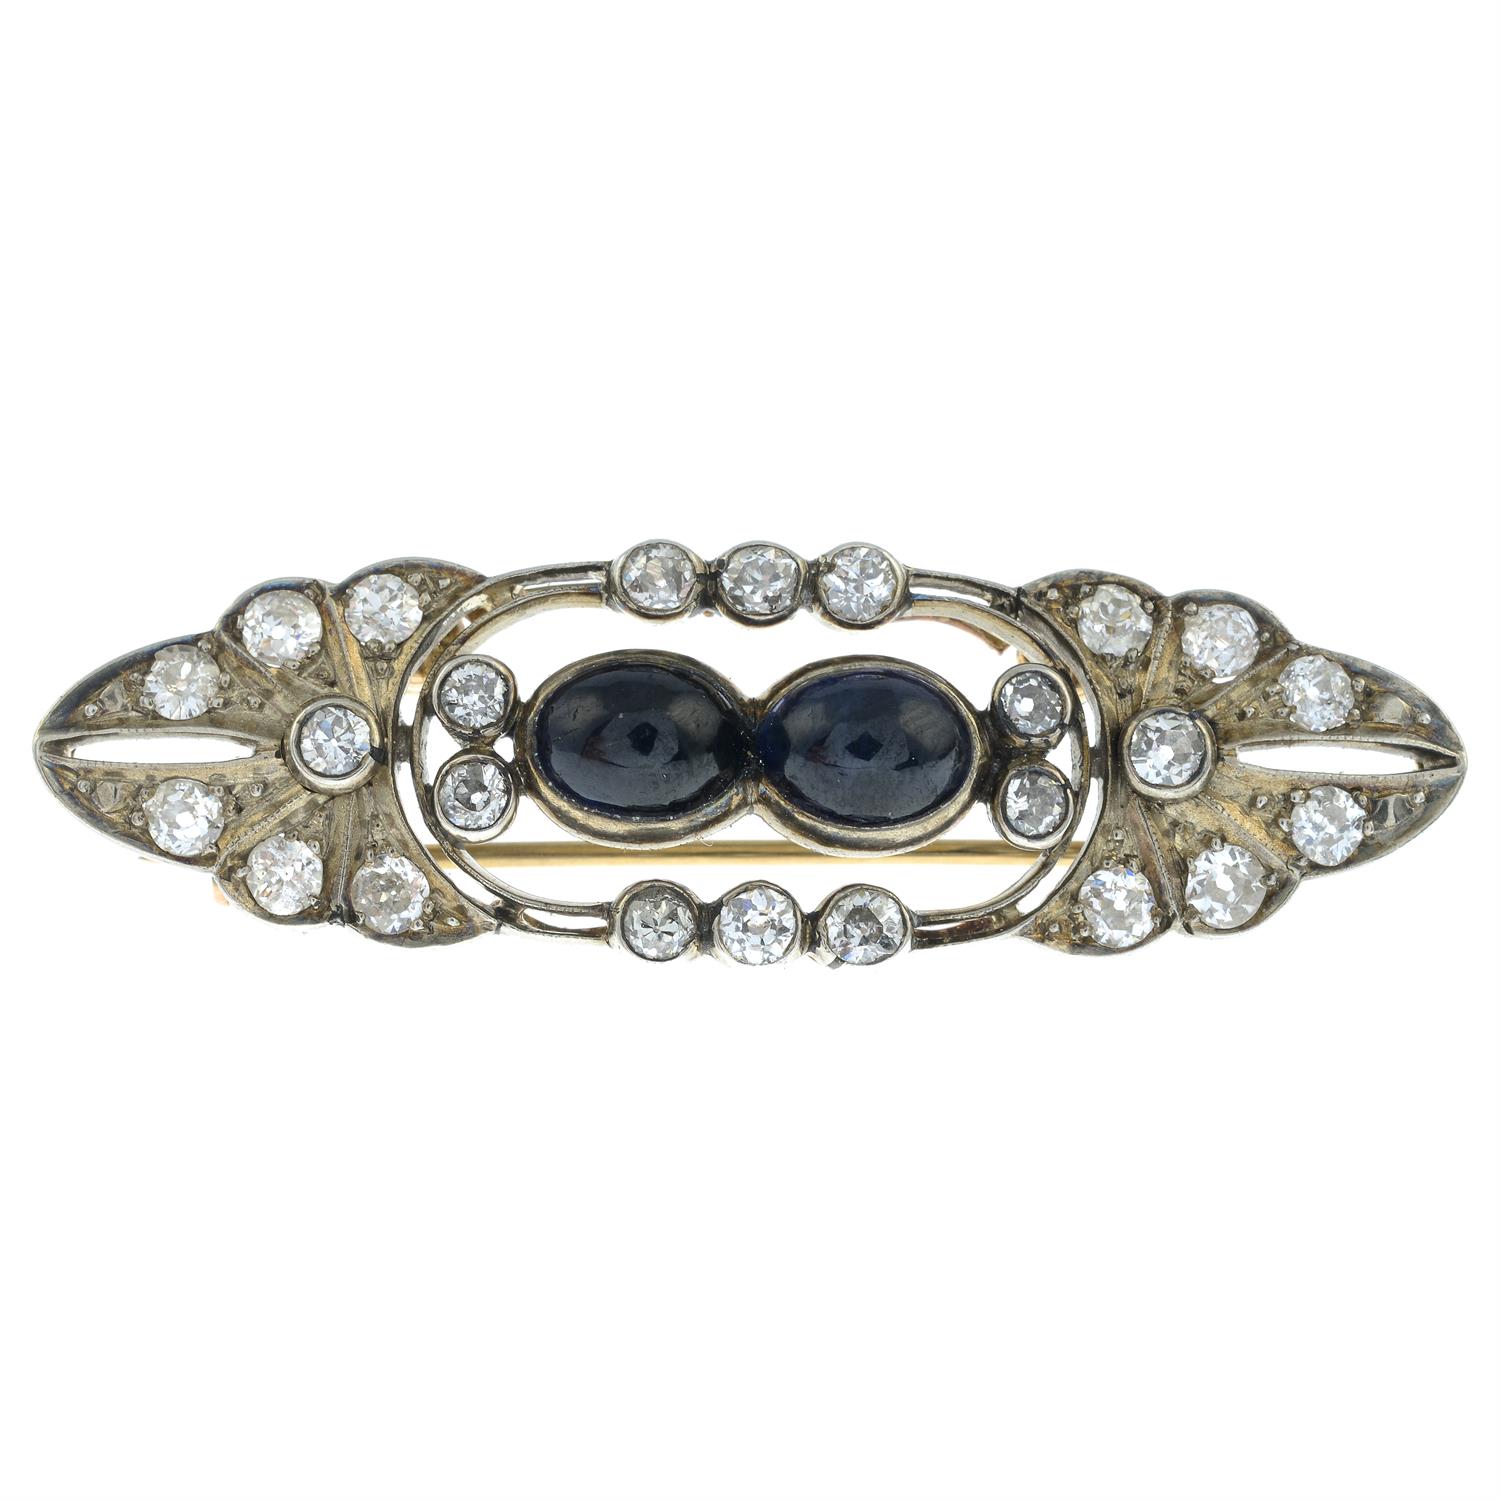 A mid 20th century silver and gold sapphire cabochon and old-cut diamond brooch.